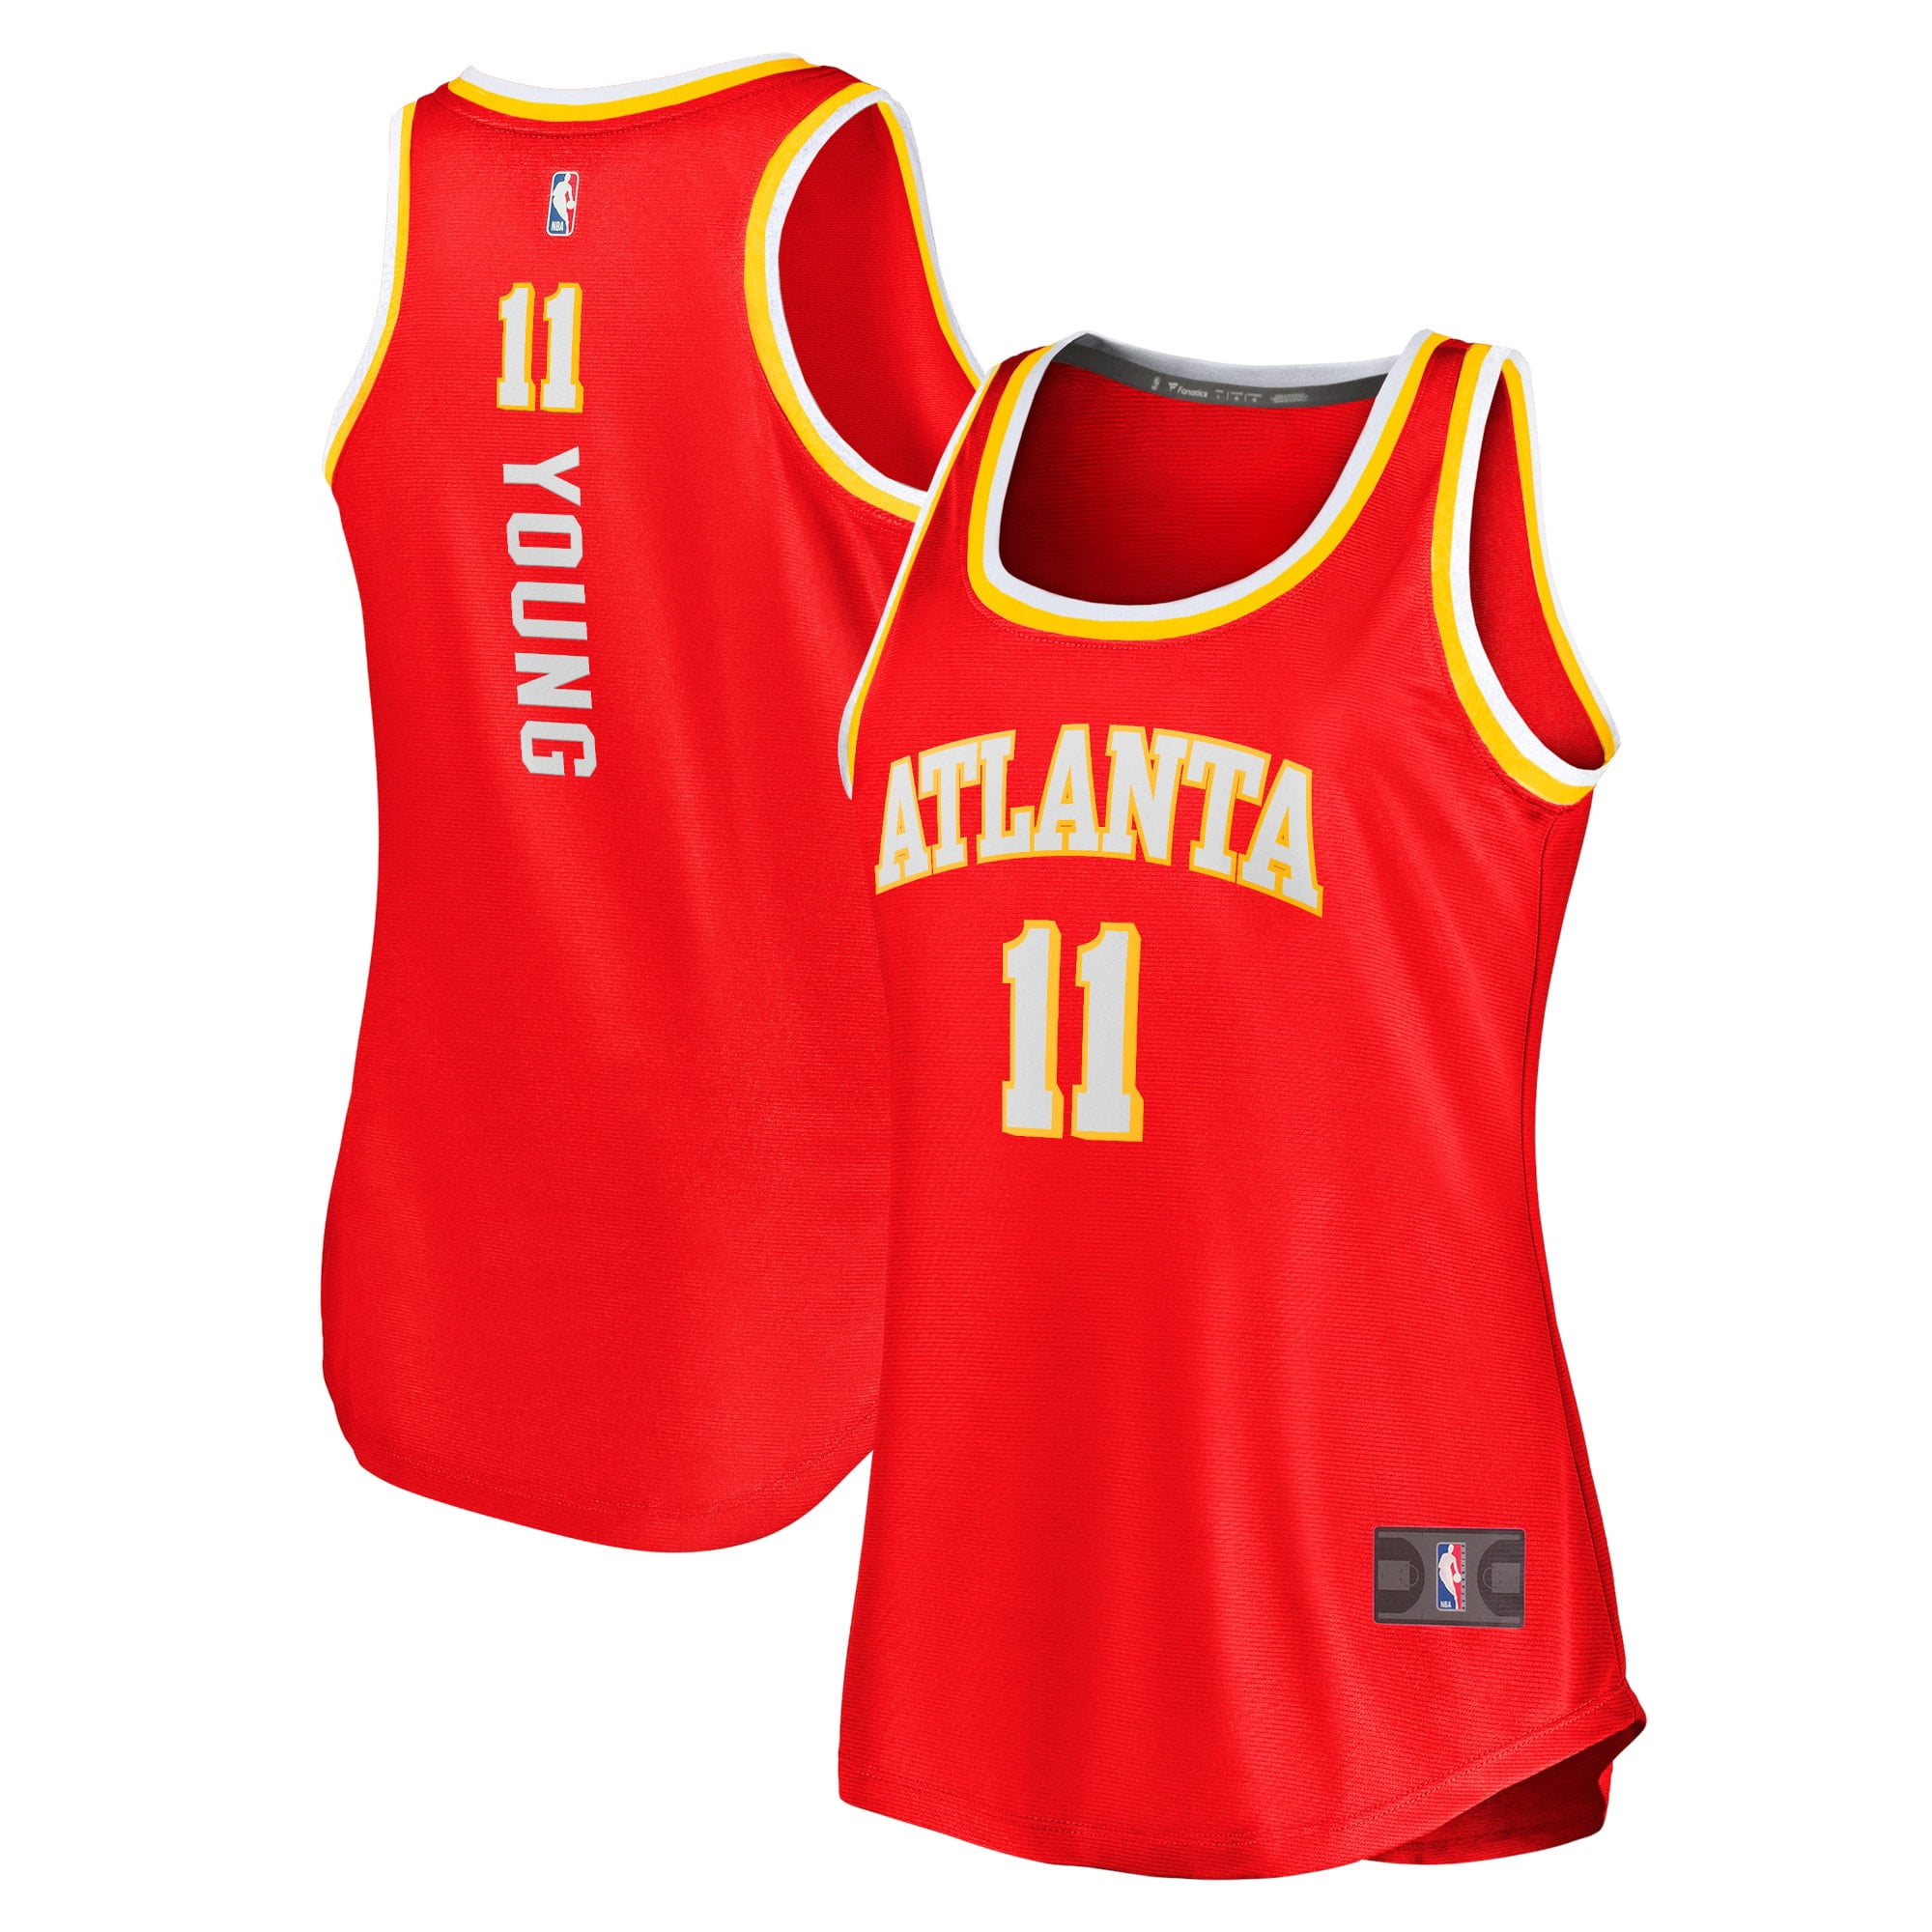 Fanatics - The NBA Earned Edition jerseys have arrived! Shop the